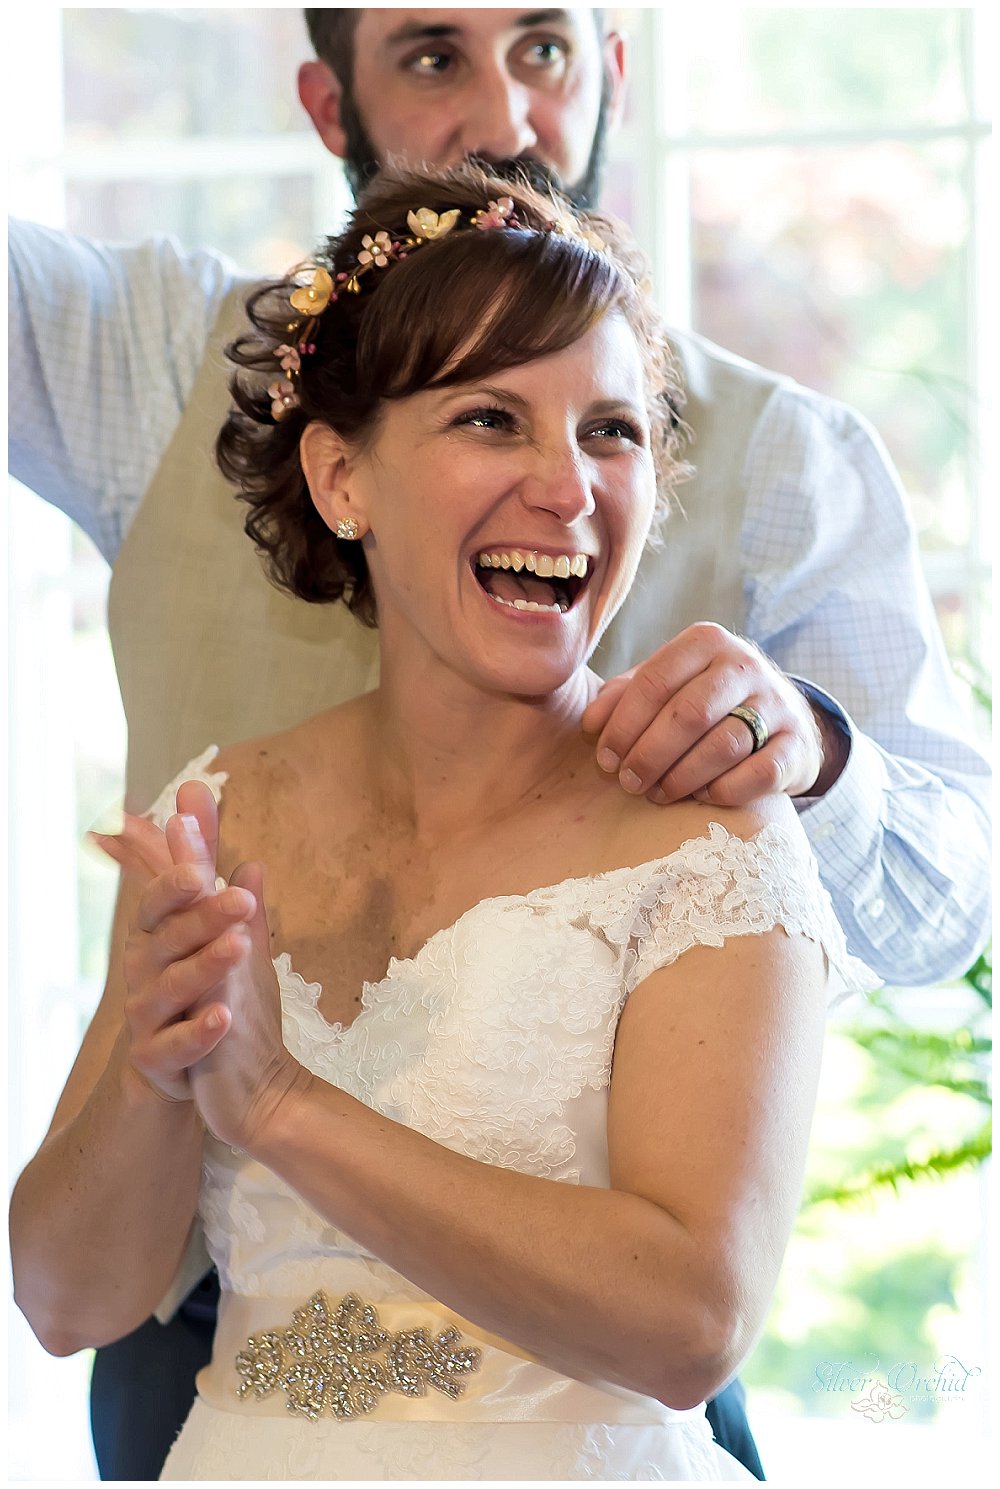 ©Silver Orchid Photography_wedding photography_Candids2015_silverorchidphotography.com_0014.jpg